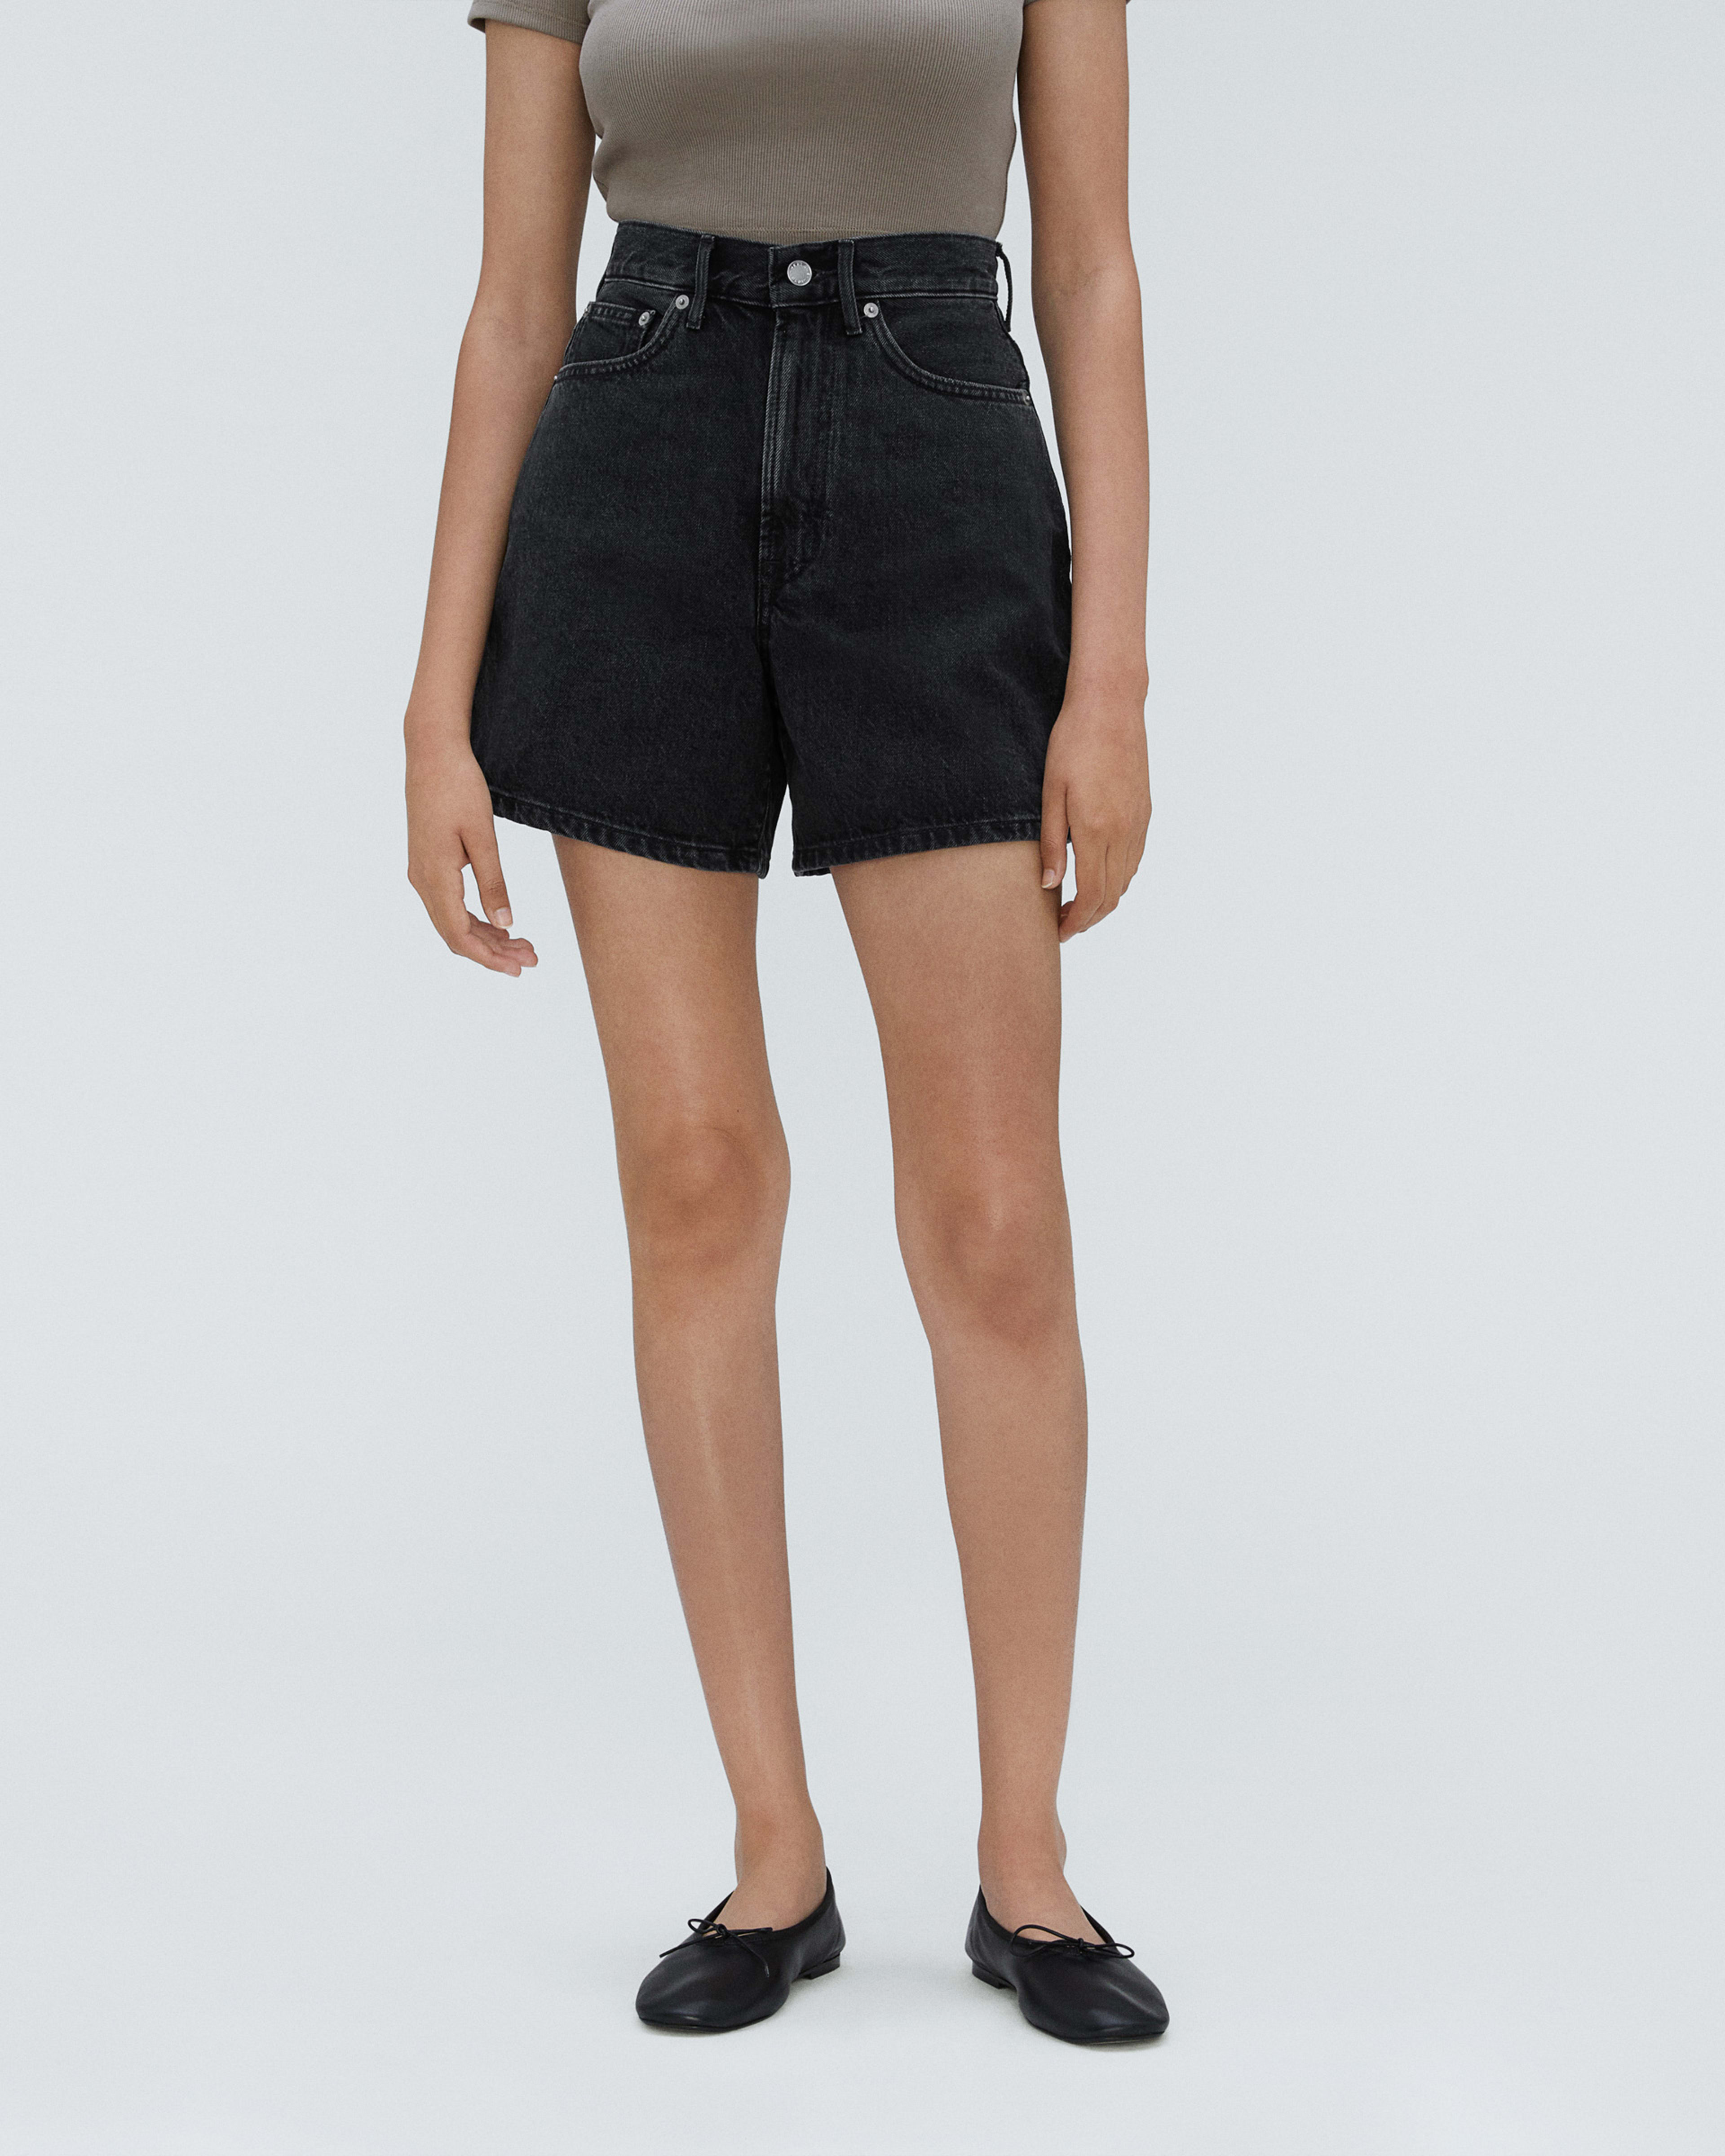 Buy QUITE COMFY BLACK SHORTS for Women Online in India